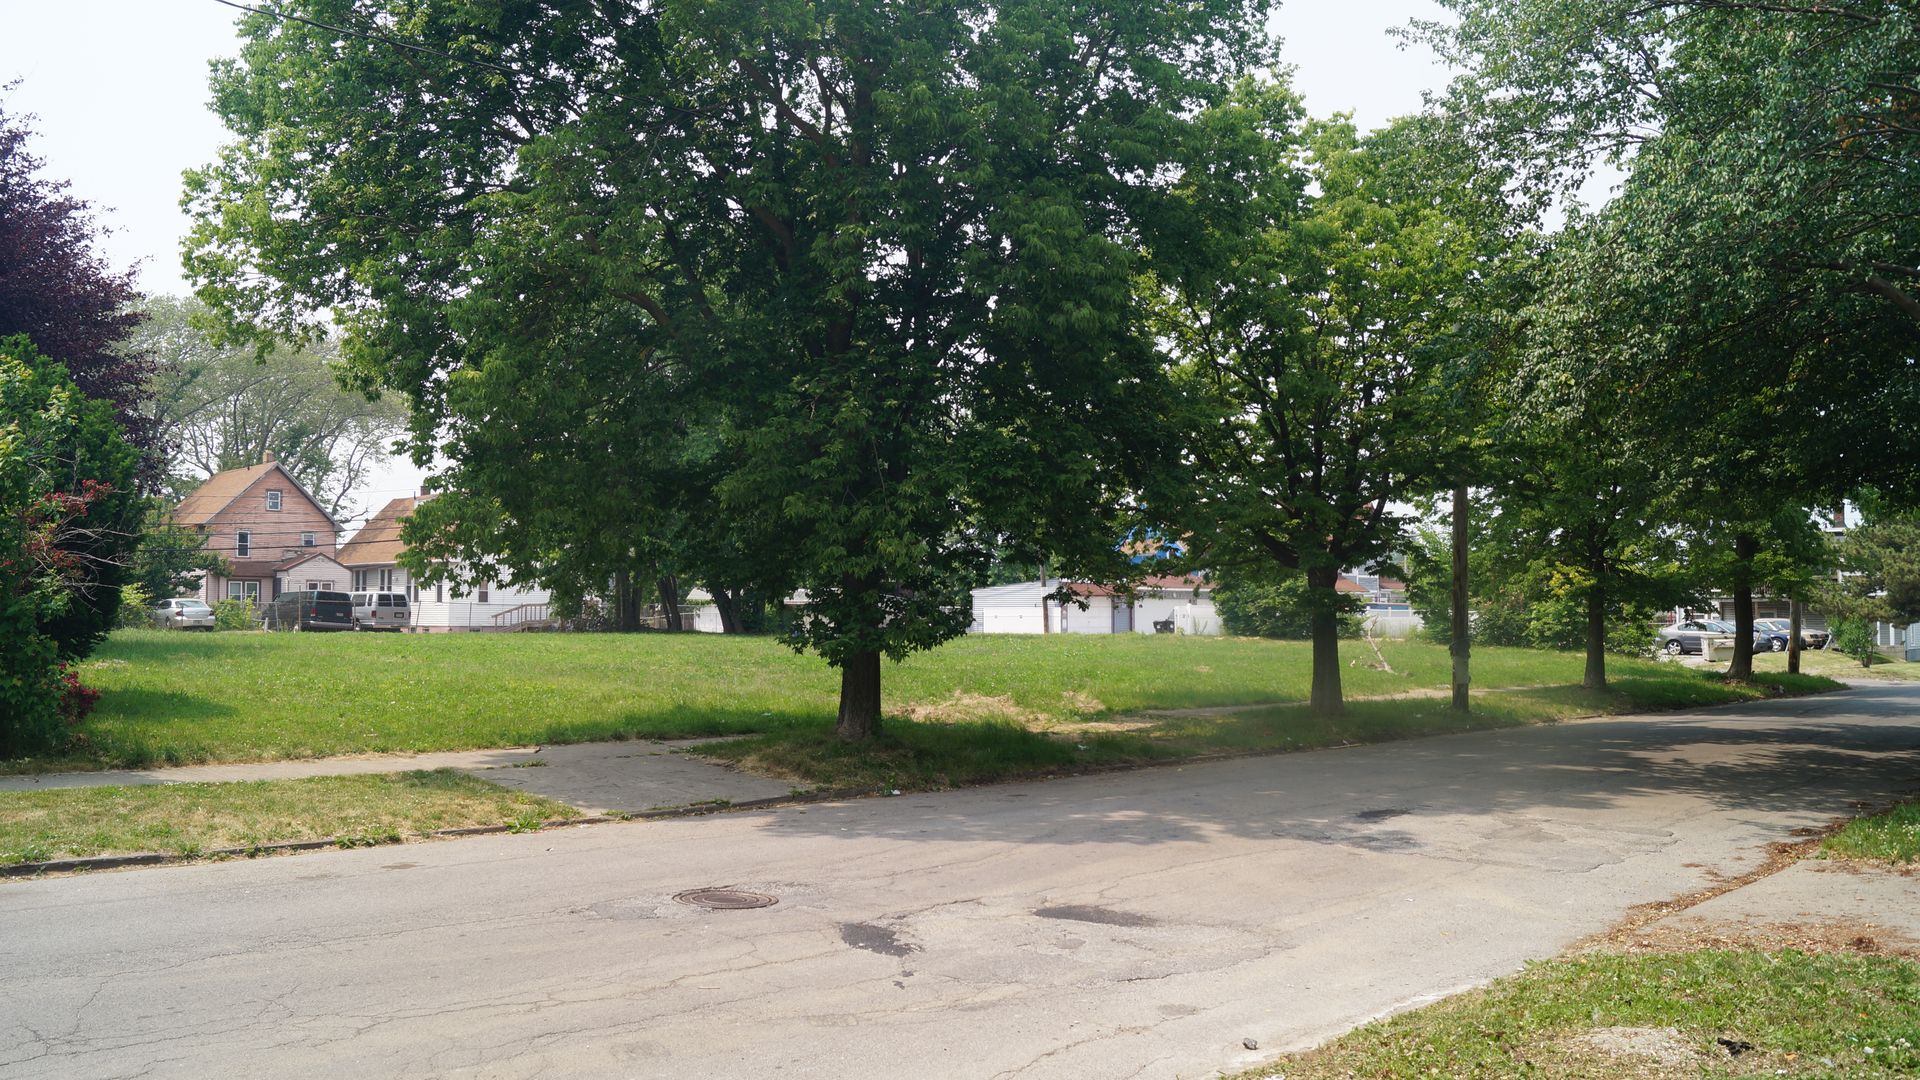 Adjacent grassy vacant lots, with trees on the tree lawn